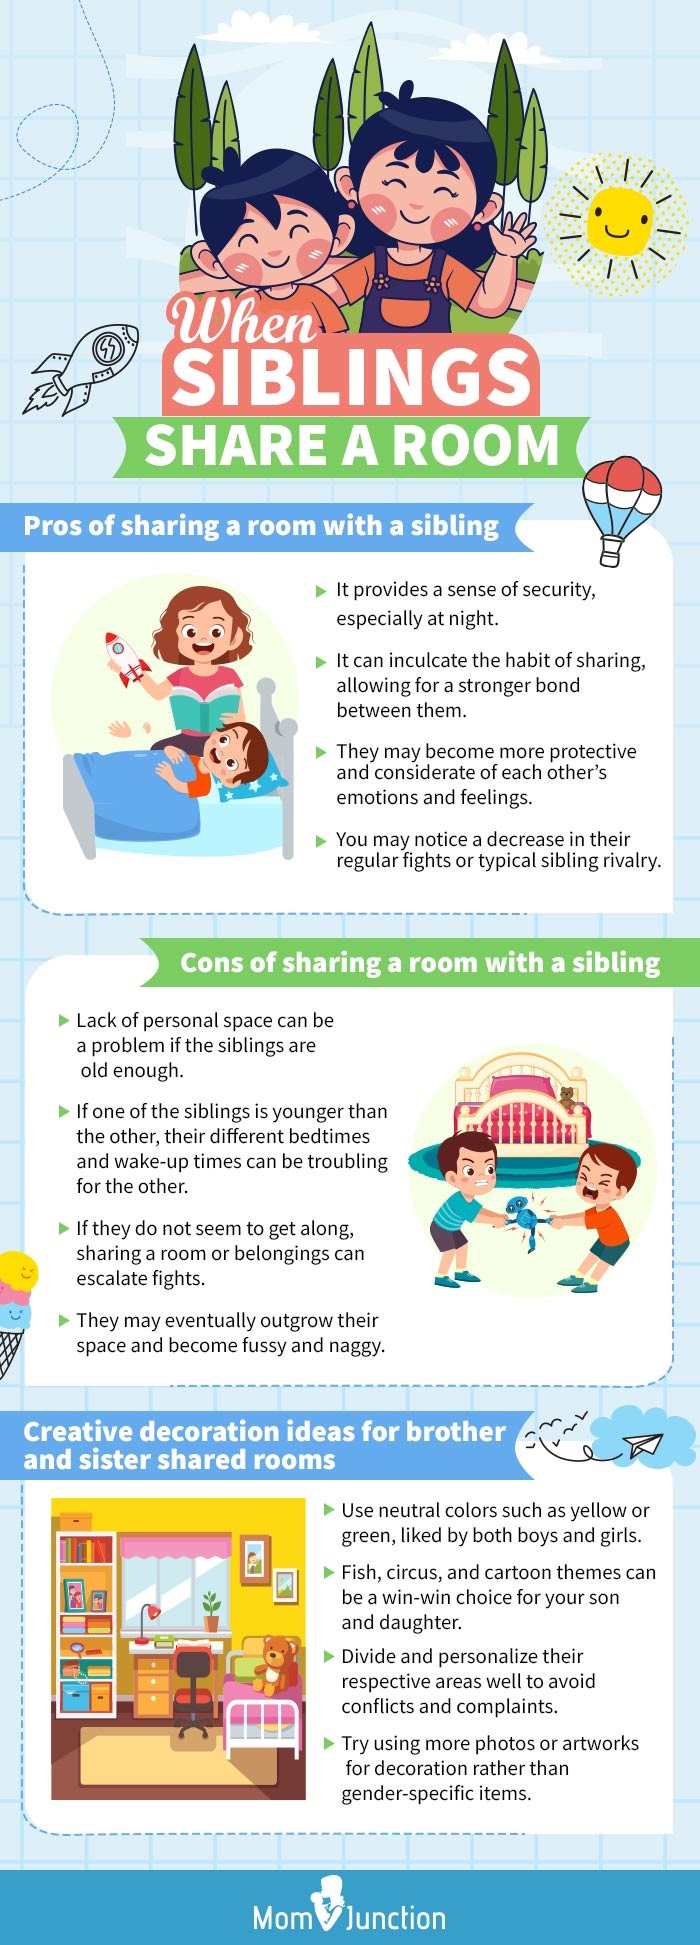 when siblings share a room [infographic]